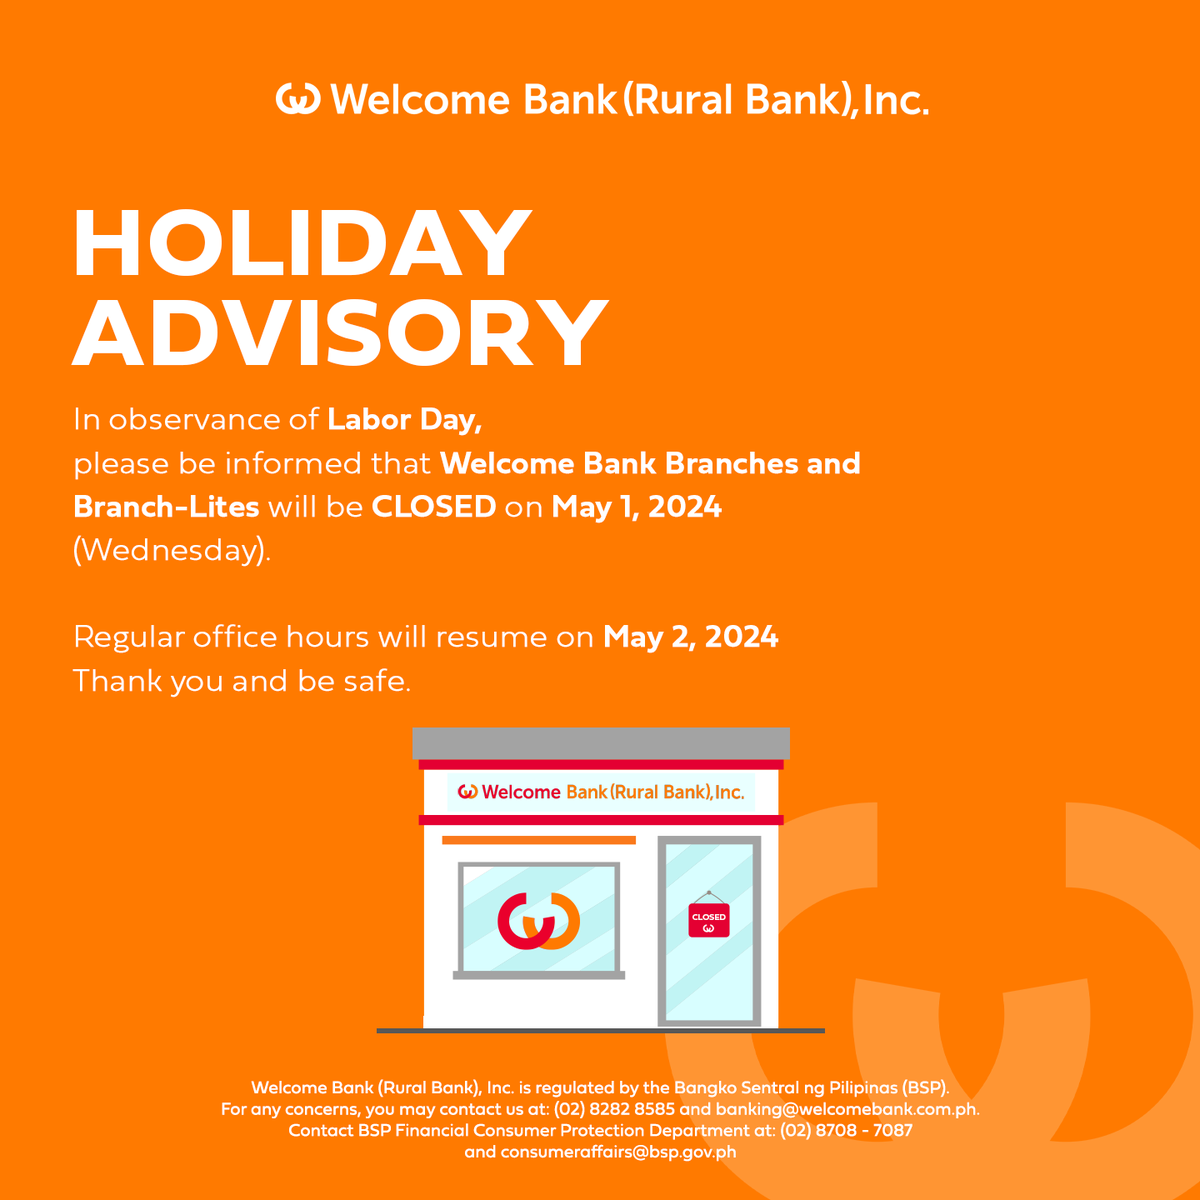 𝗛𝗼𝗹𝗶𝗱𝗮𝘆 𝗔𝗱𝘃𝗶𝘀𝗼𝗿𝘆: Please be informed that all of our bank operations will be closed on May 1, 2024 in observance of the Labor Day.

Regular banking operations will resume on May 2, 2024.

#WelcomeBank #HolidayAdvisory